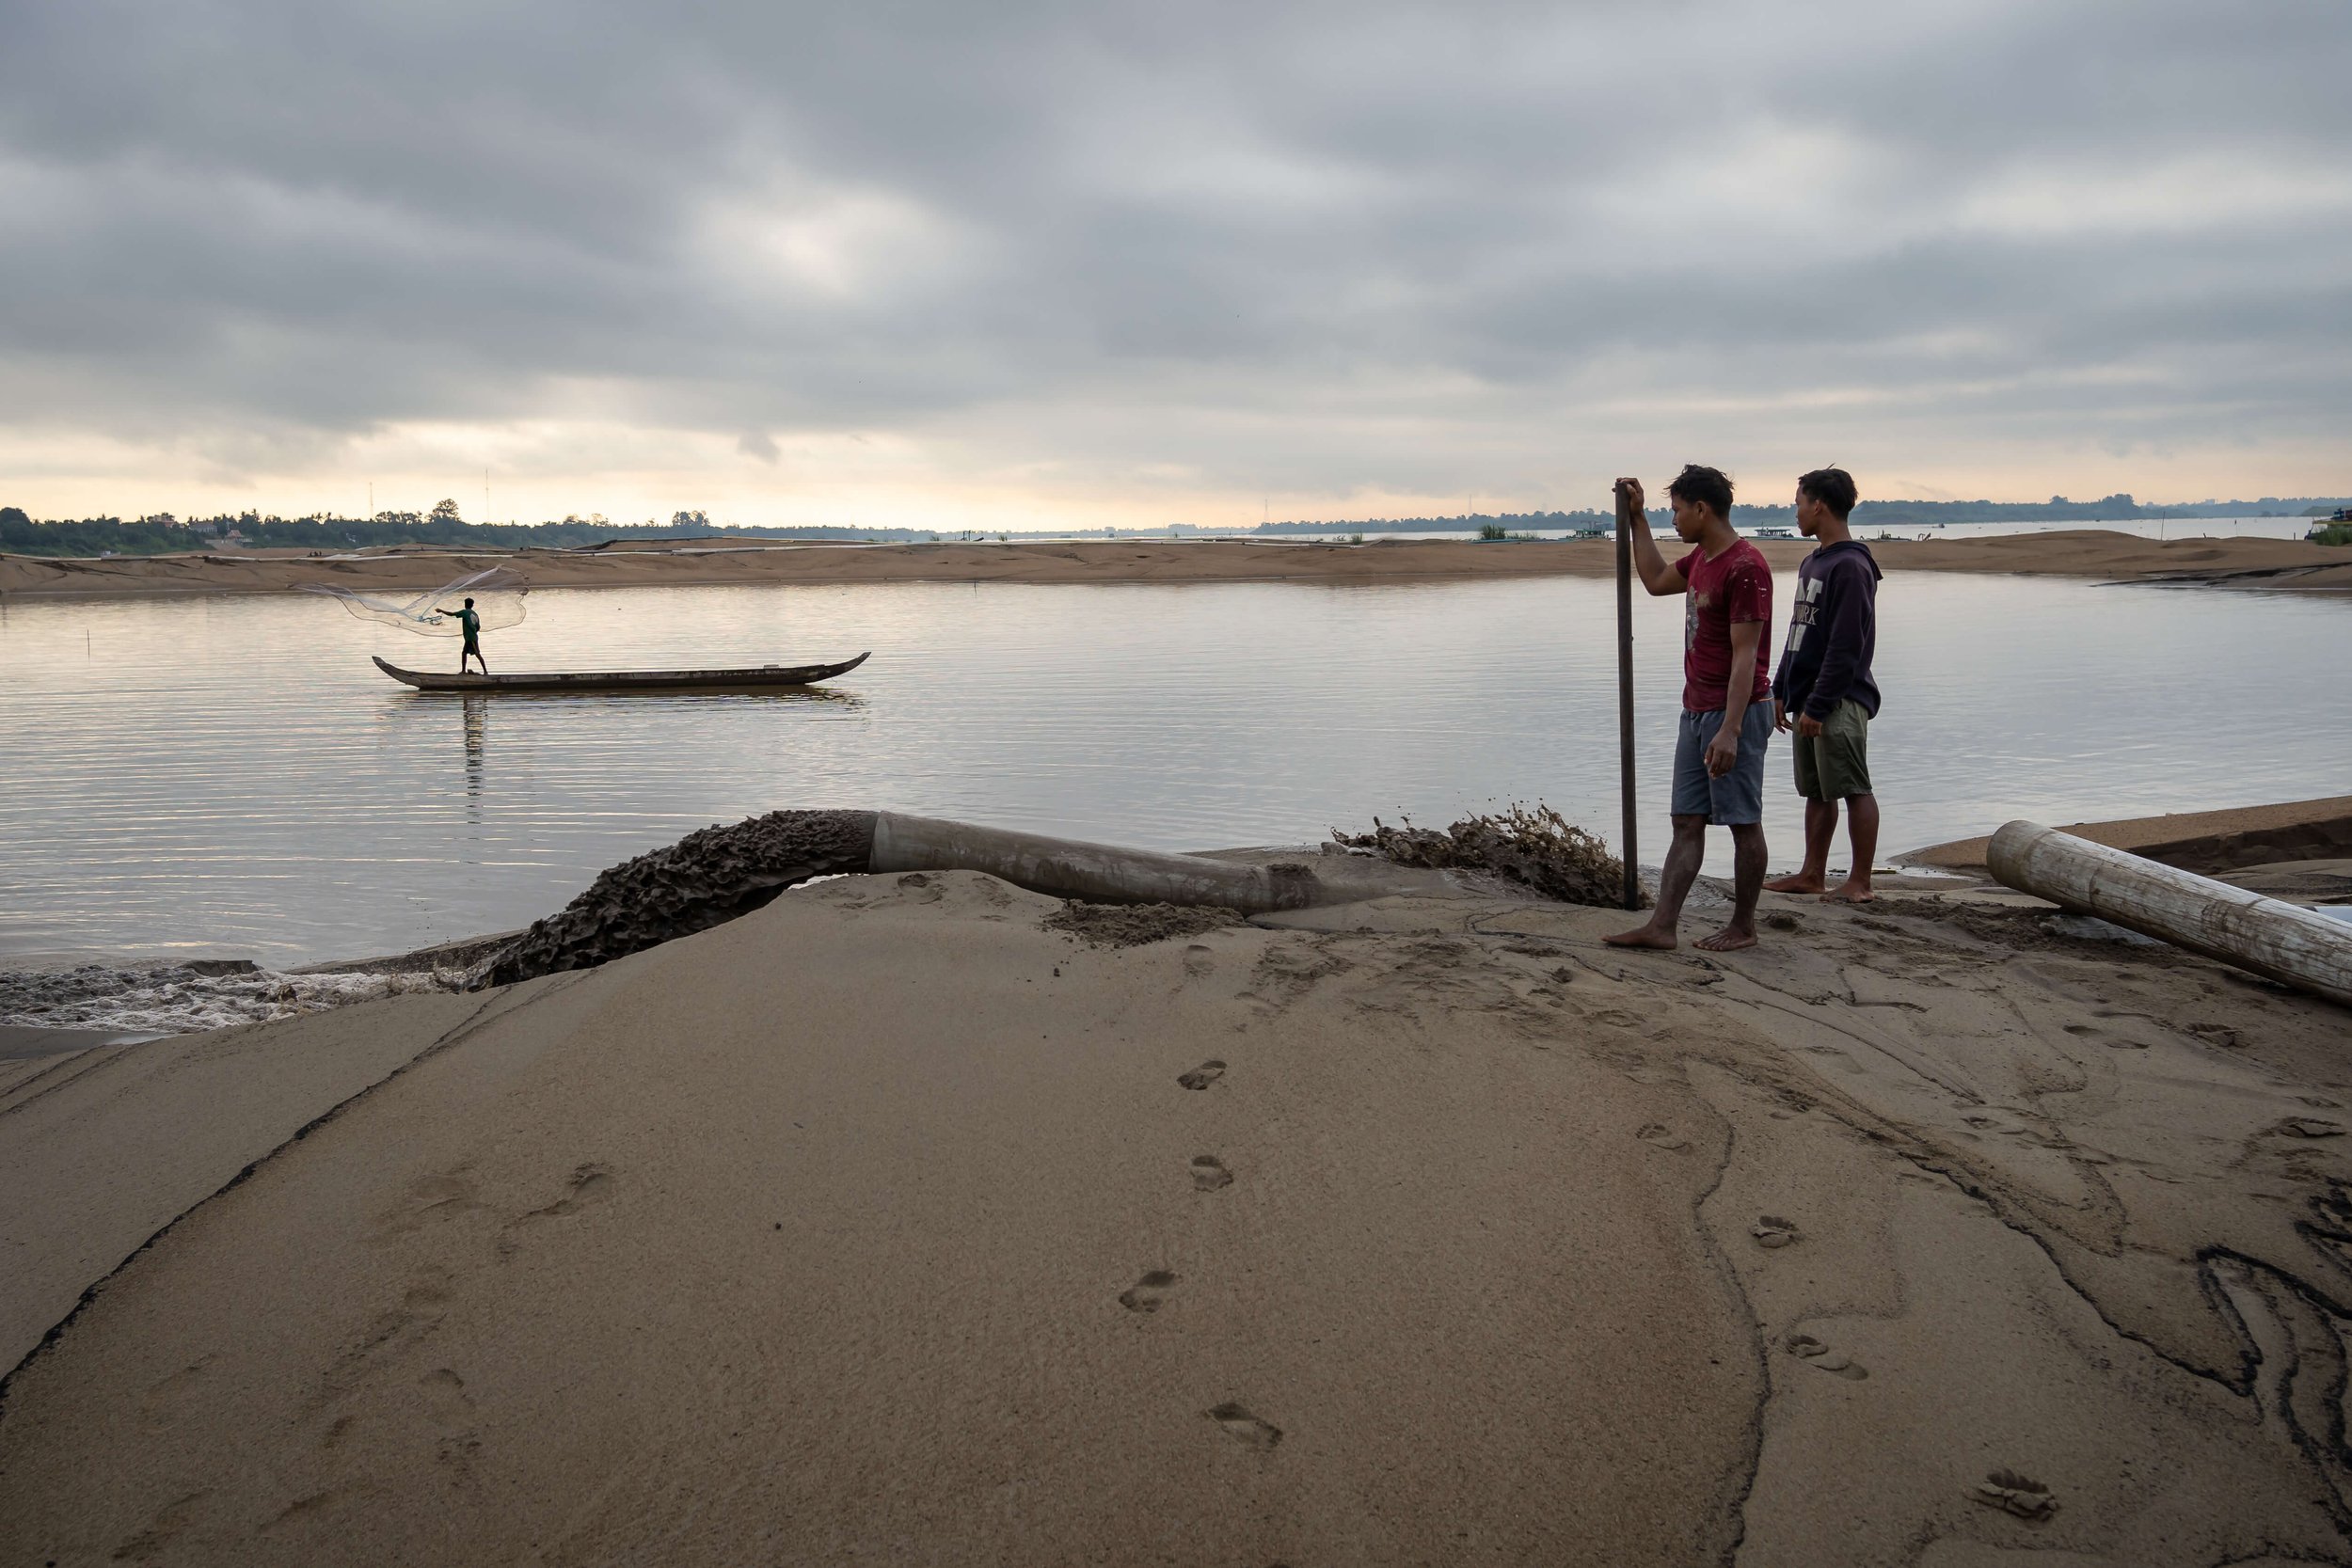  Sand mining workers look on as a fisher casts his net into a temporary lake created by one of Phnom Penh’s latest major land reclamations along the Mekong river. As the city continues to grow, so too does the thirst for sand, leading to an uncertain